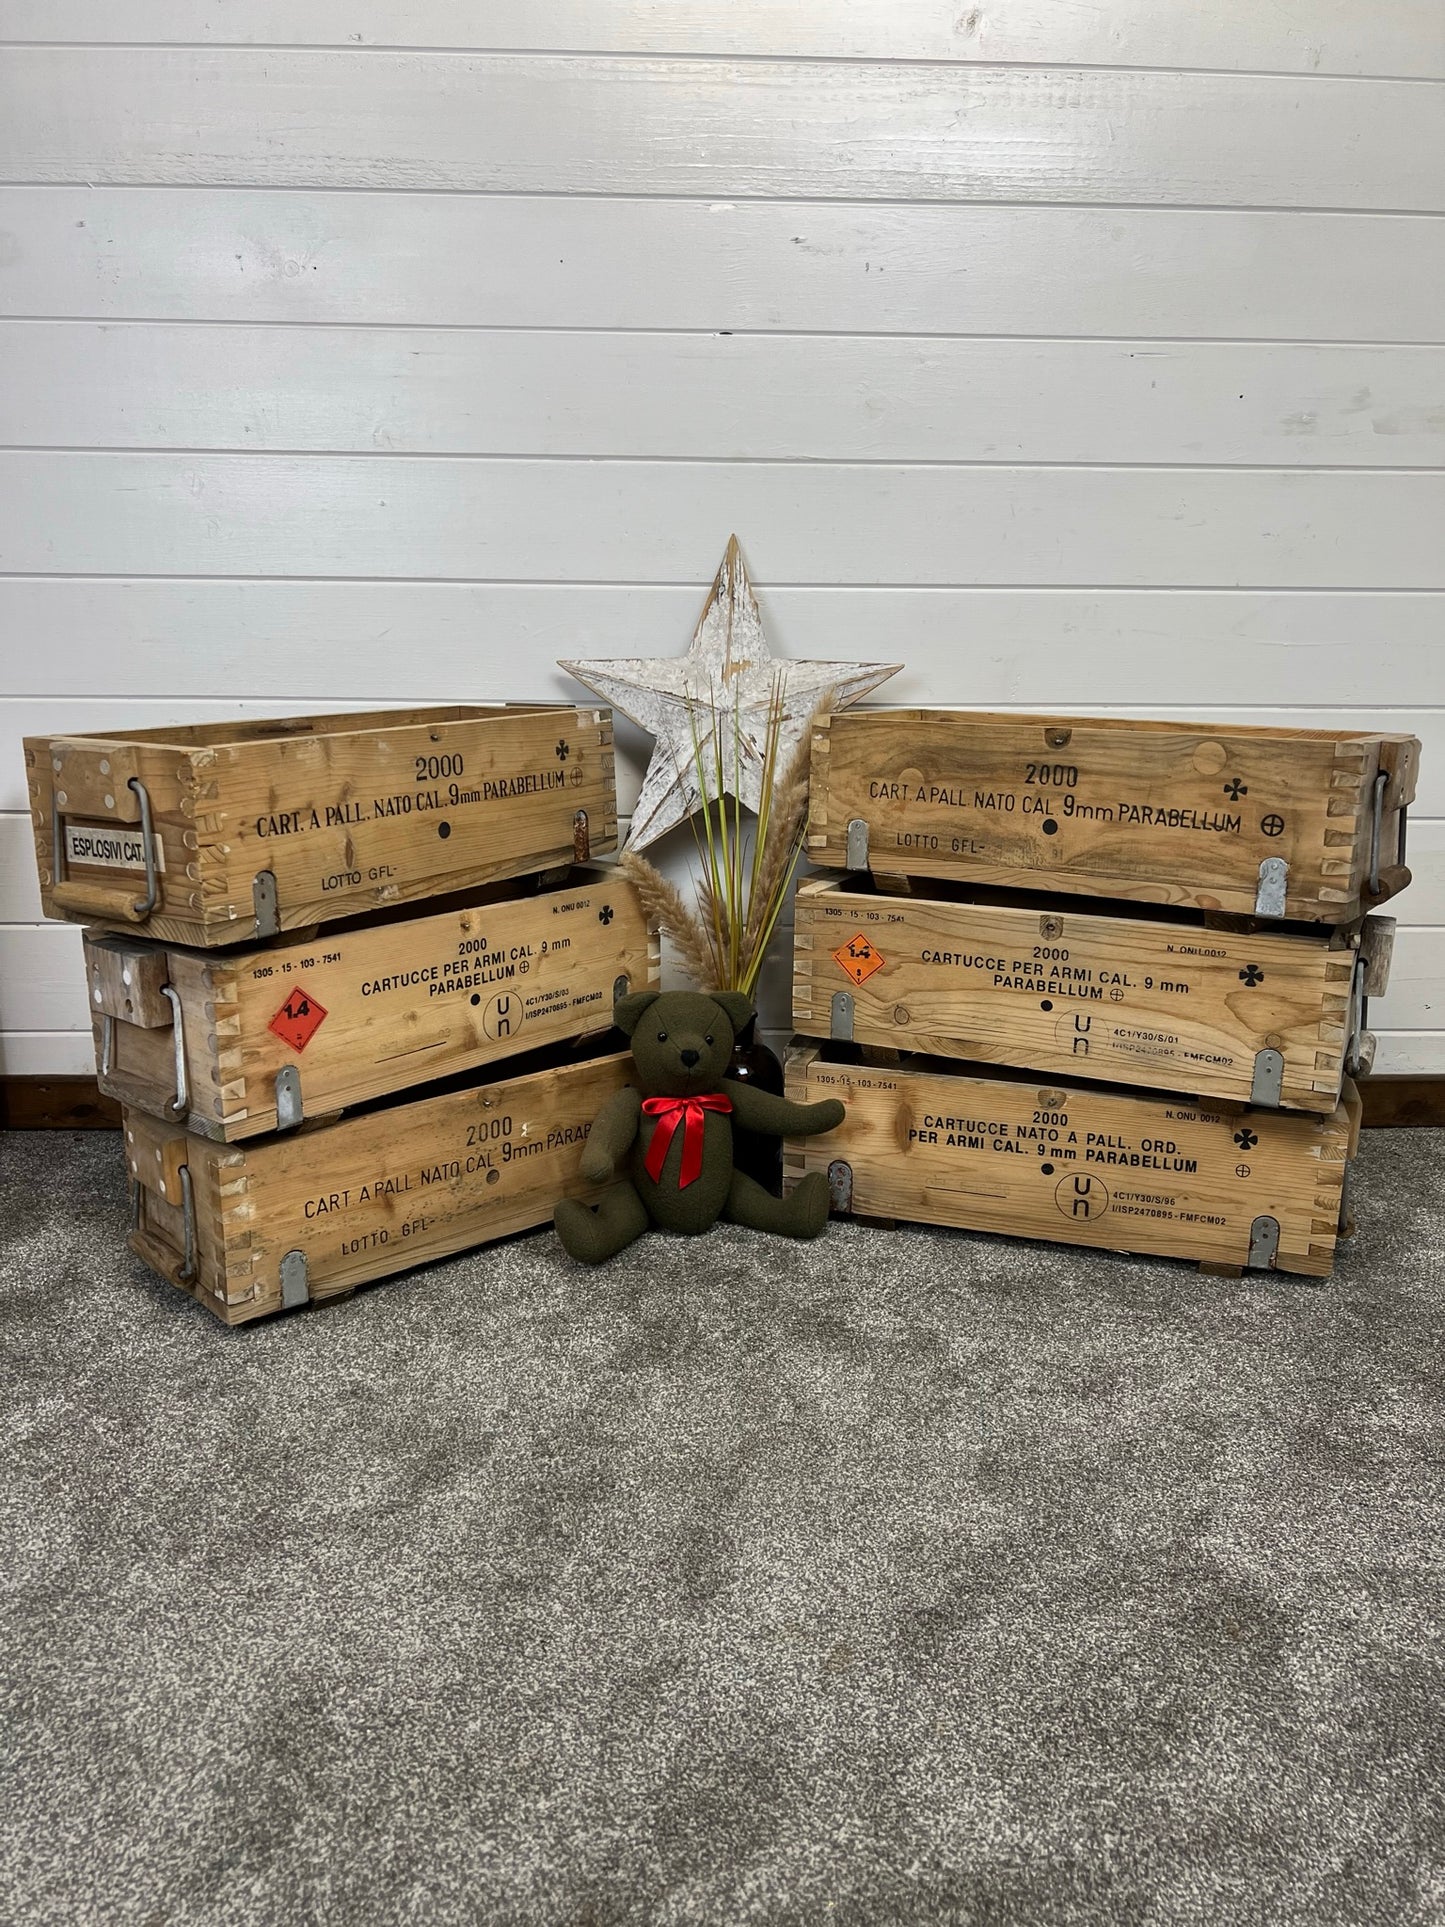 Rustic Industrial Wooden Home Decor Storage Box Small Vintage Ammo Chest Toolbox